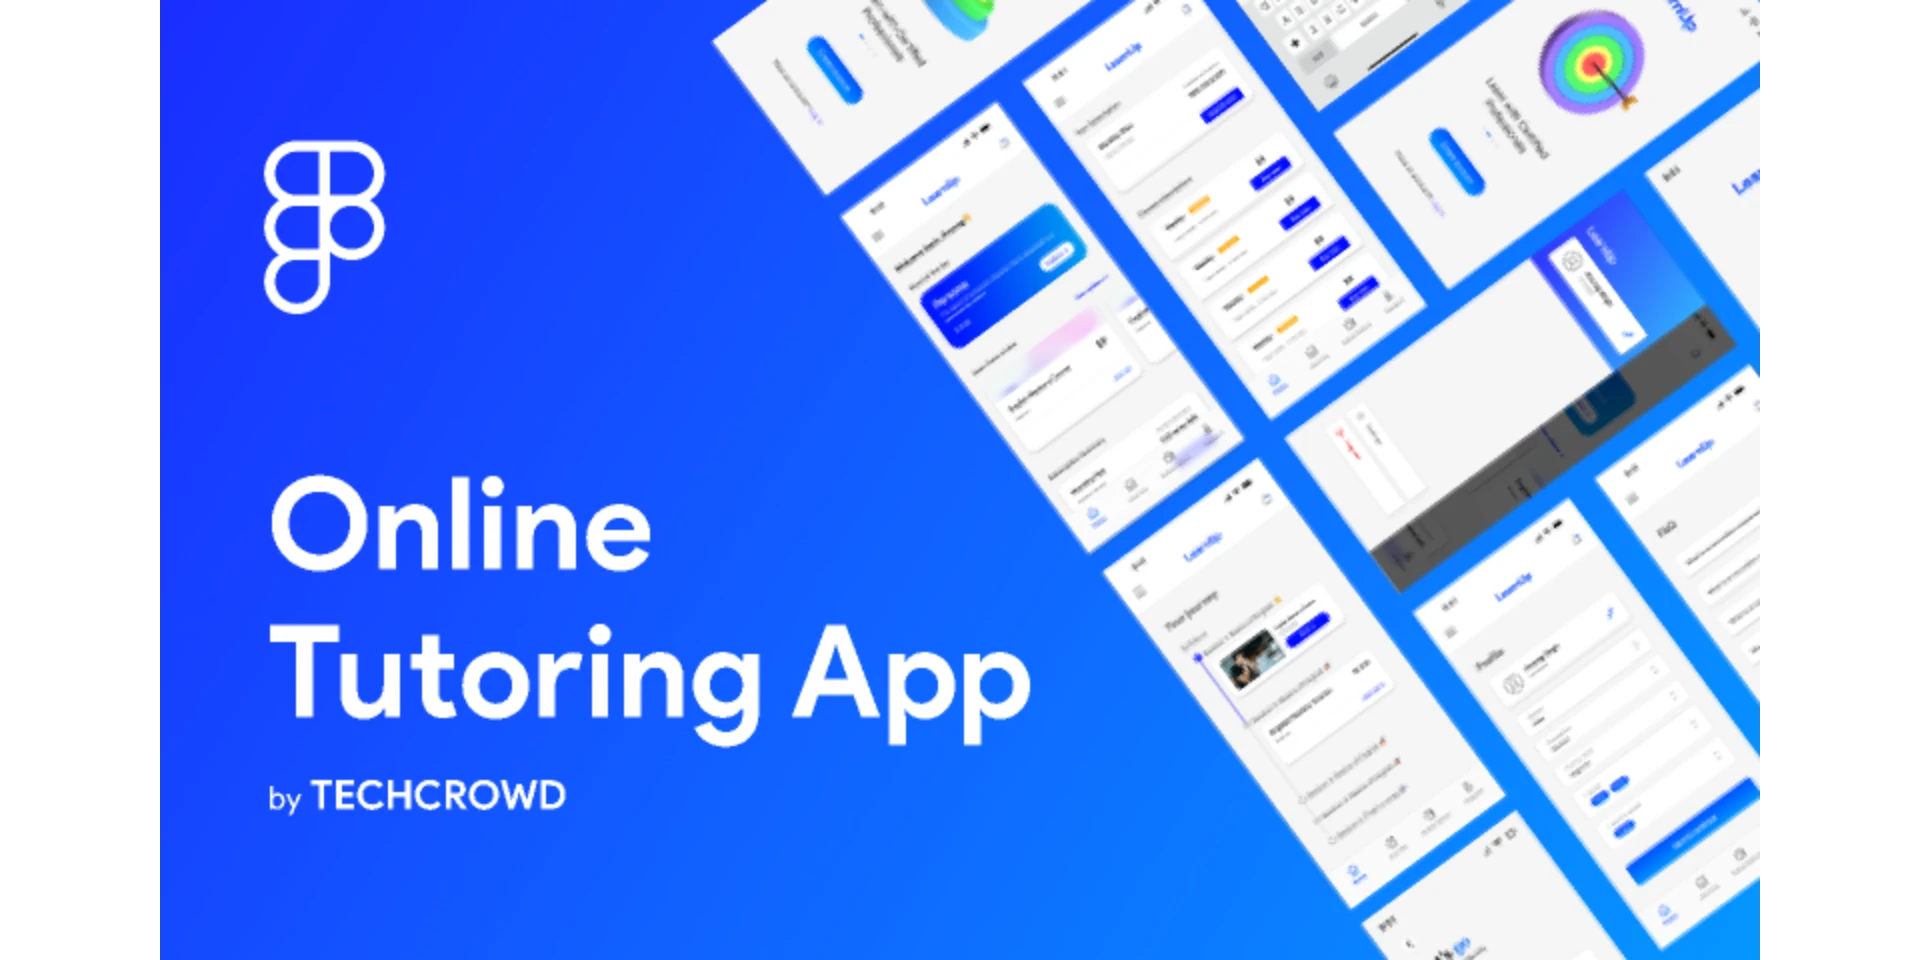 LearnUp - Online Tutoring App for Figma and Adobe XD